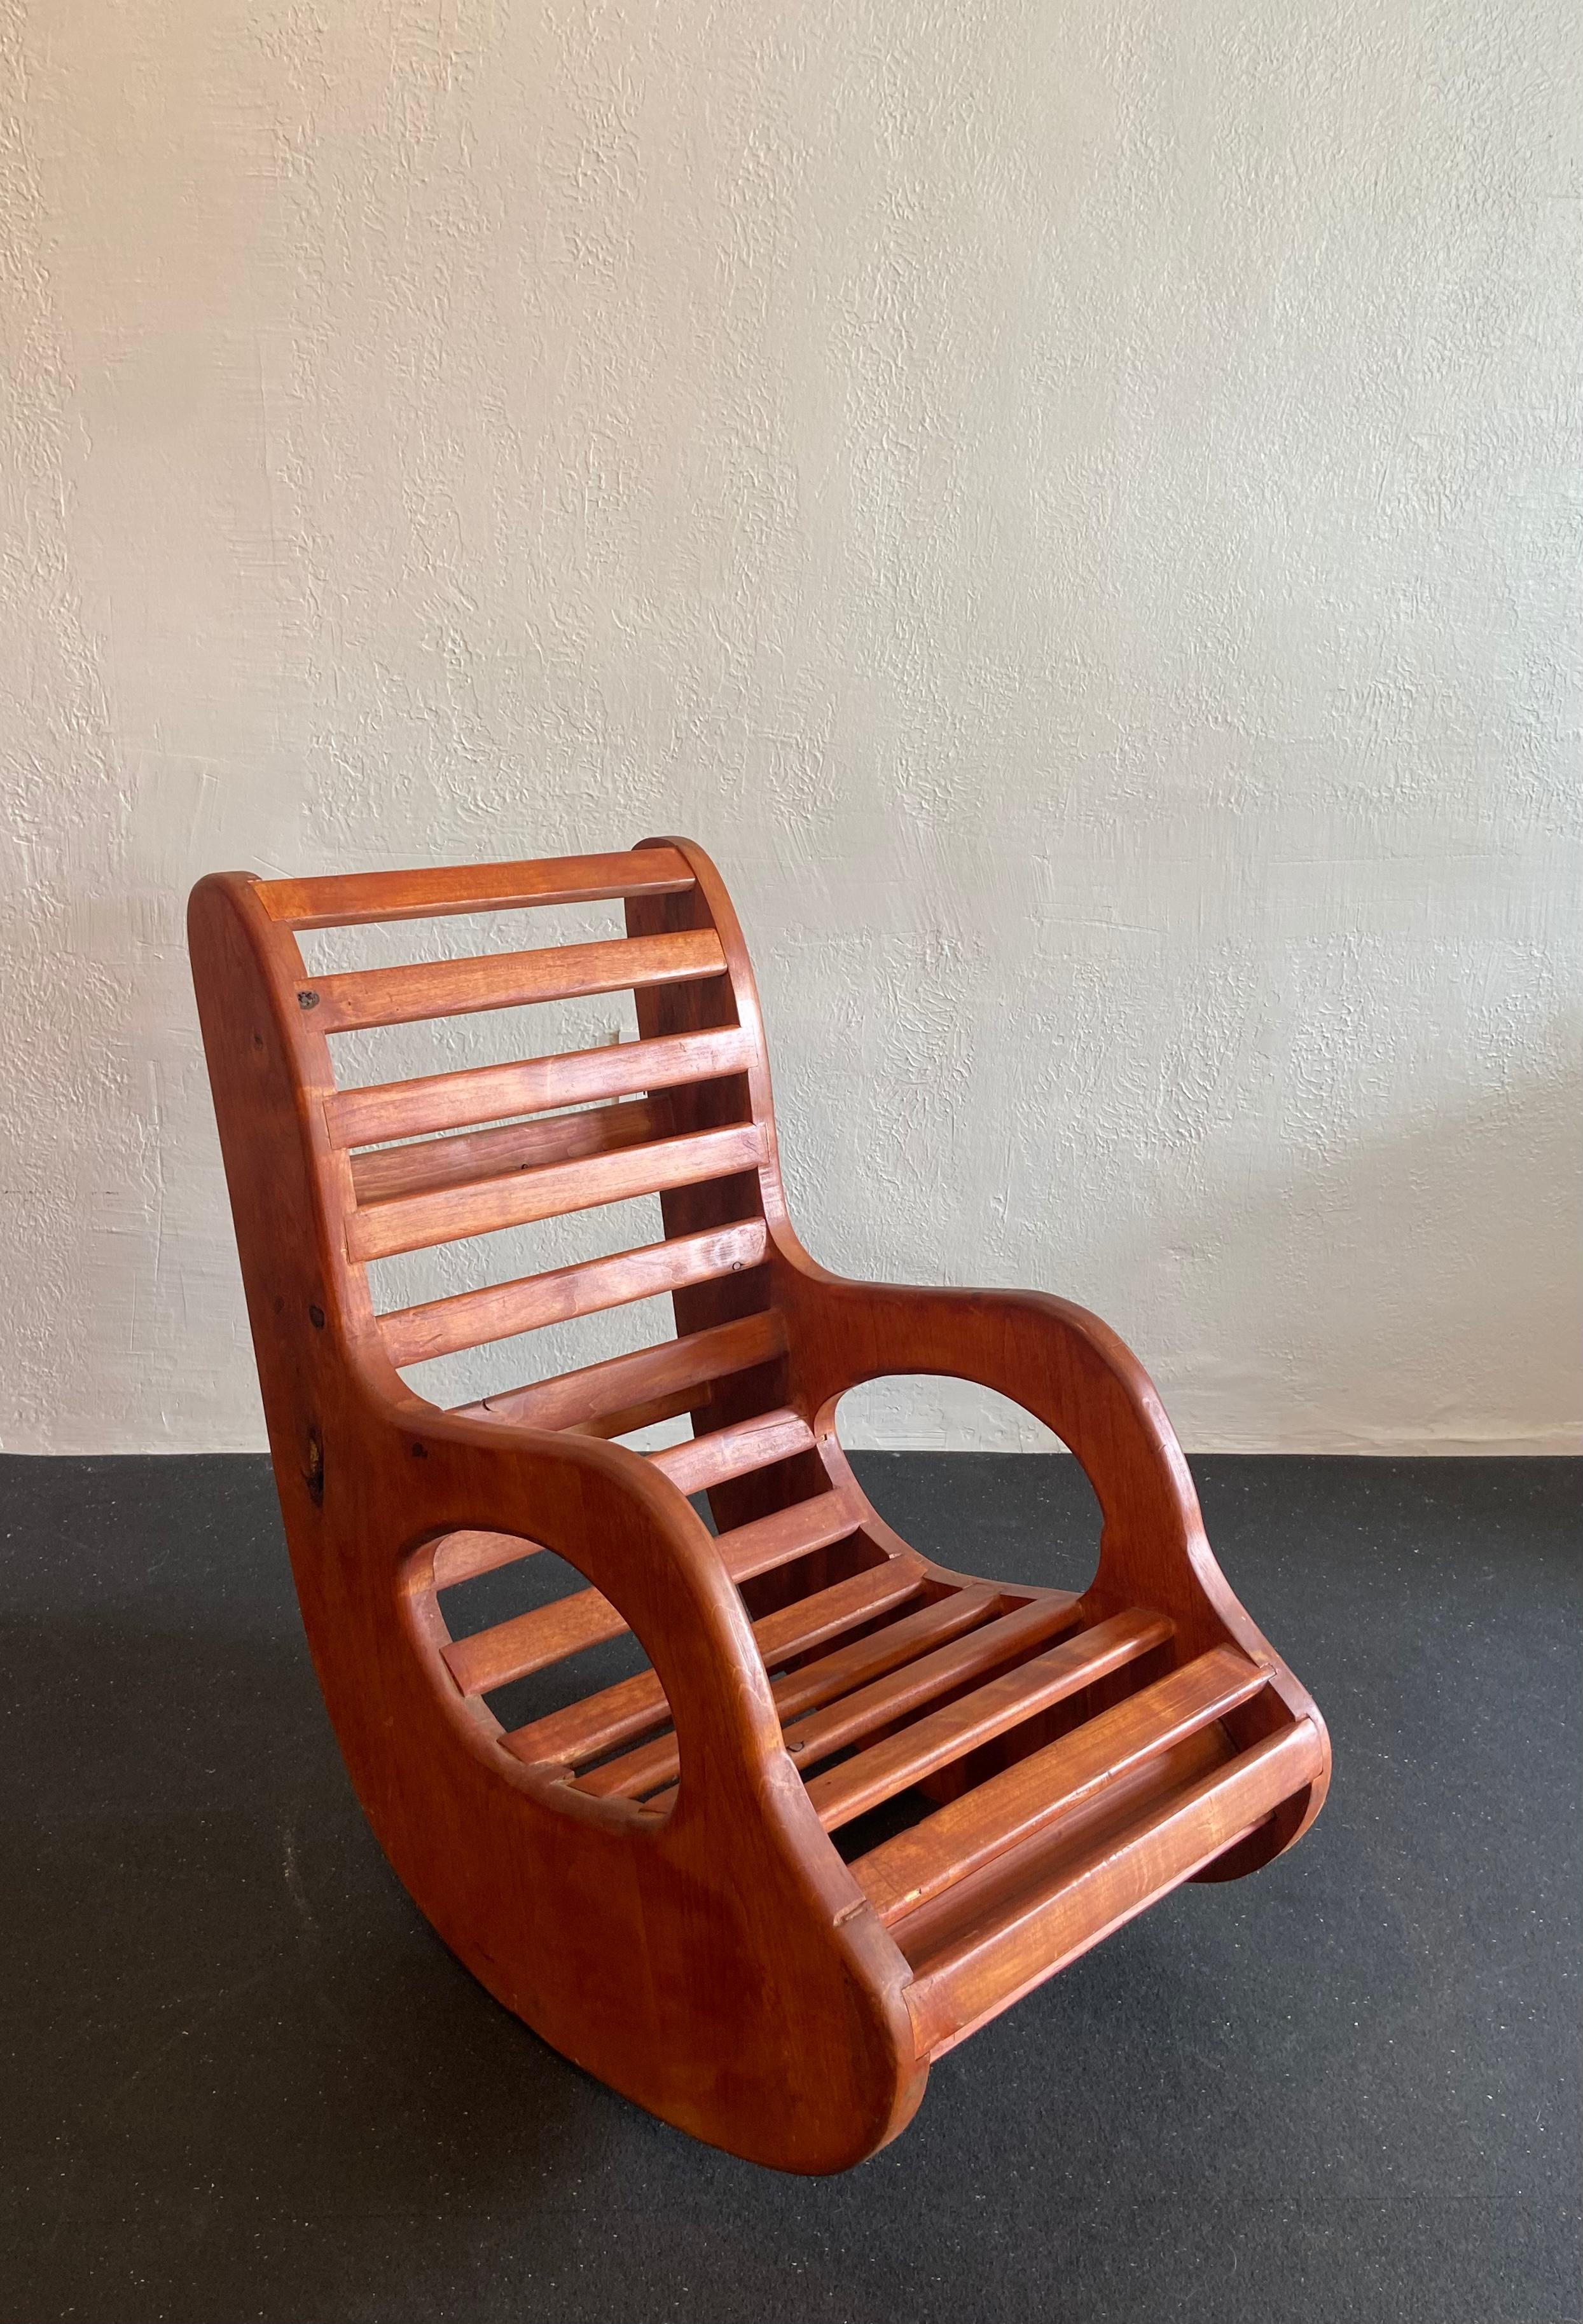 Studio craft organic form rocking chair executed in pine. Exposed knots found throughout. Excellent candidate for a new finish. 

Would work well in a variety of interiors such as modern, mid century modern, Hollywood regency, etc. Piece blends